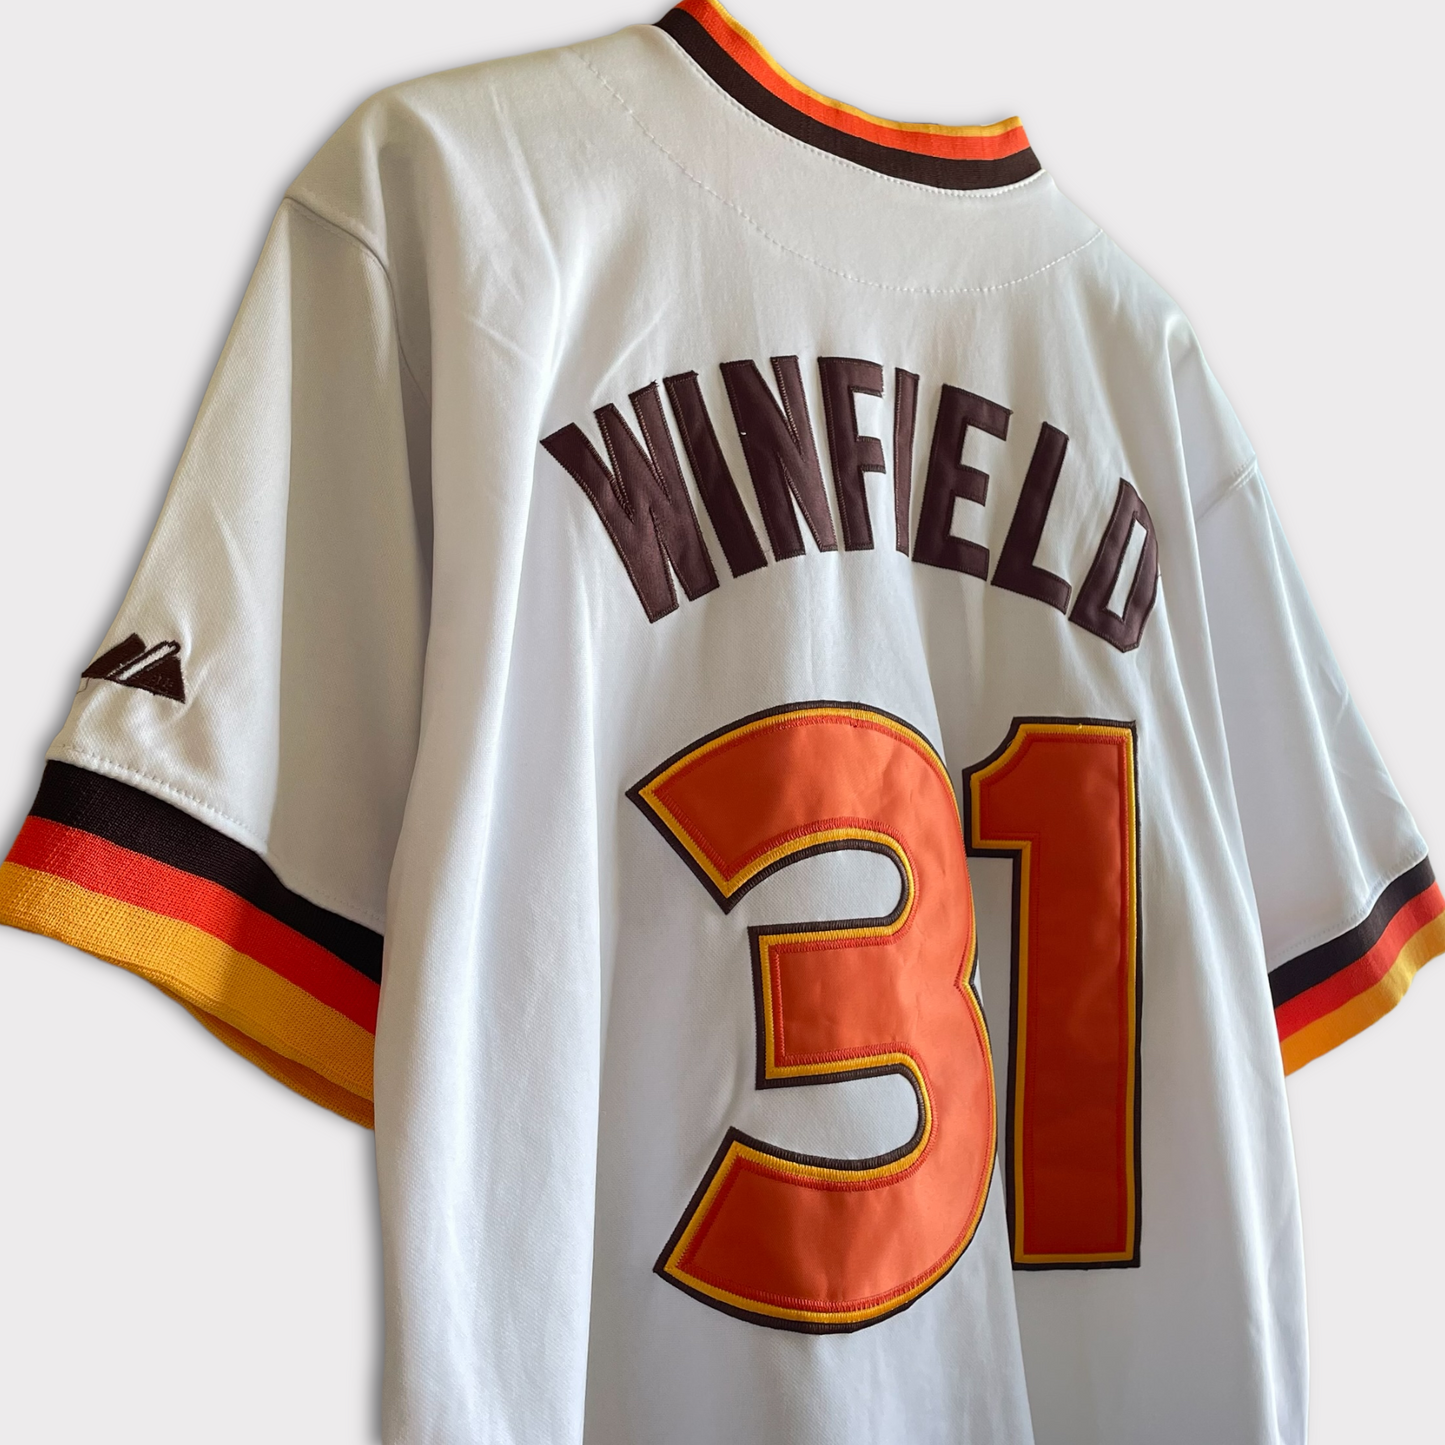 MLB Dave Winfield #31 Padres Jersey